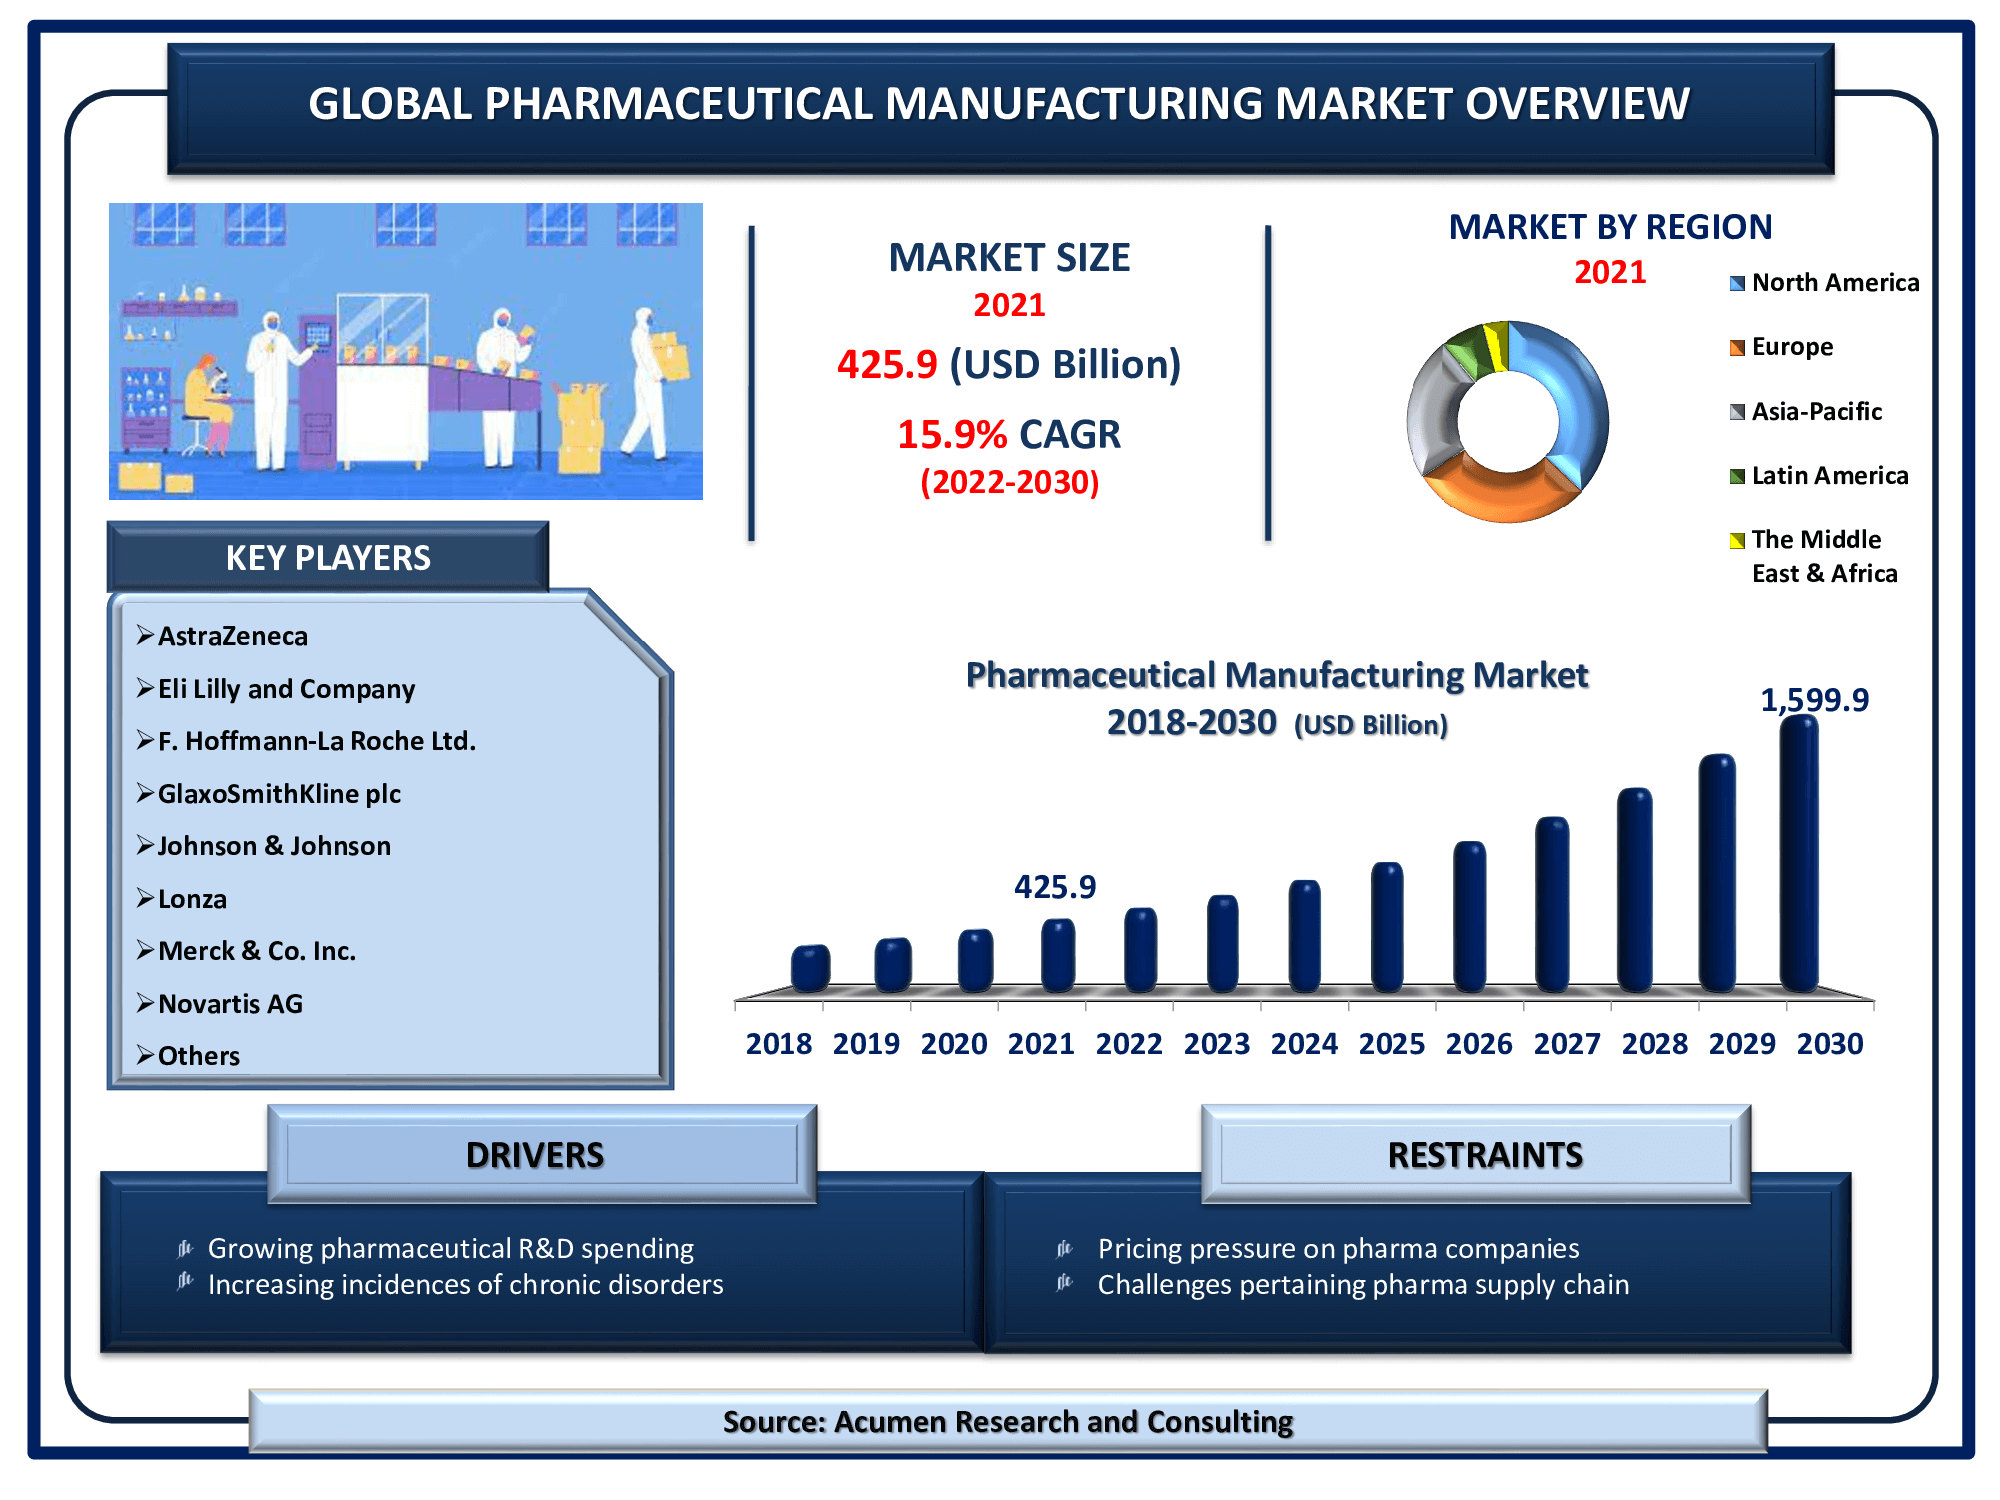 Global Pharmaceutical Manufacturing Market revenue is poised to garner USD 1,599.9 Billion by 2030 with a CAGR of 15.9% from 2022 to 2030